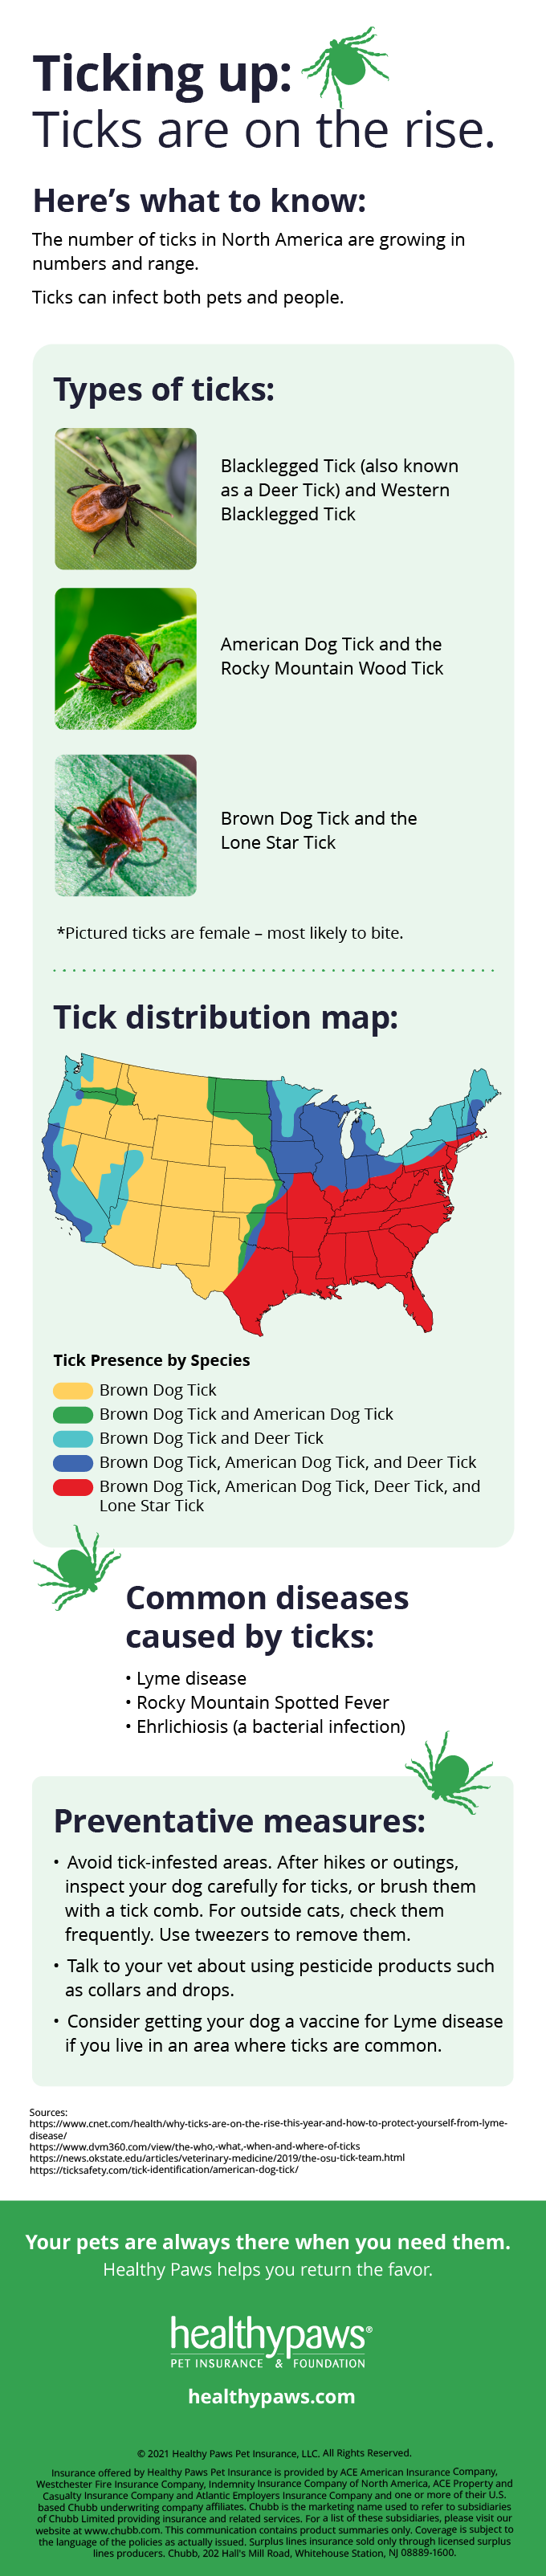 Infographic - all about ticks